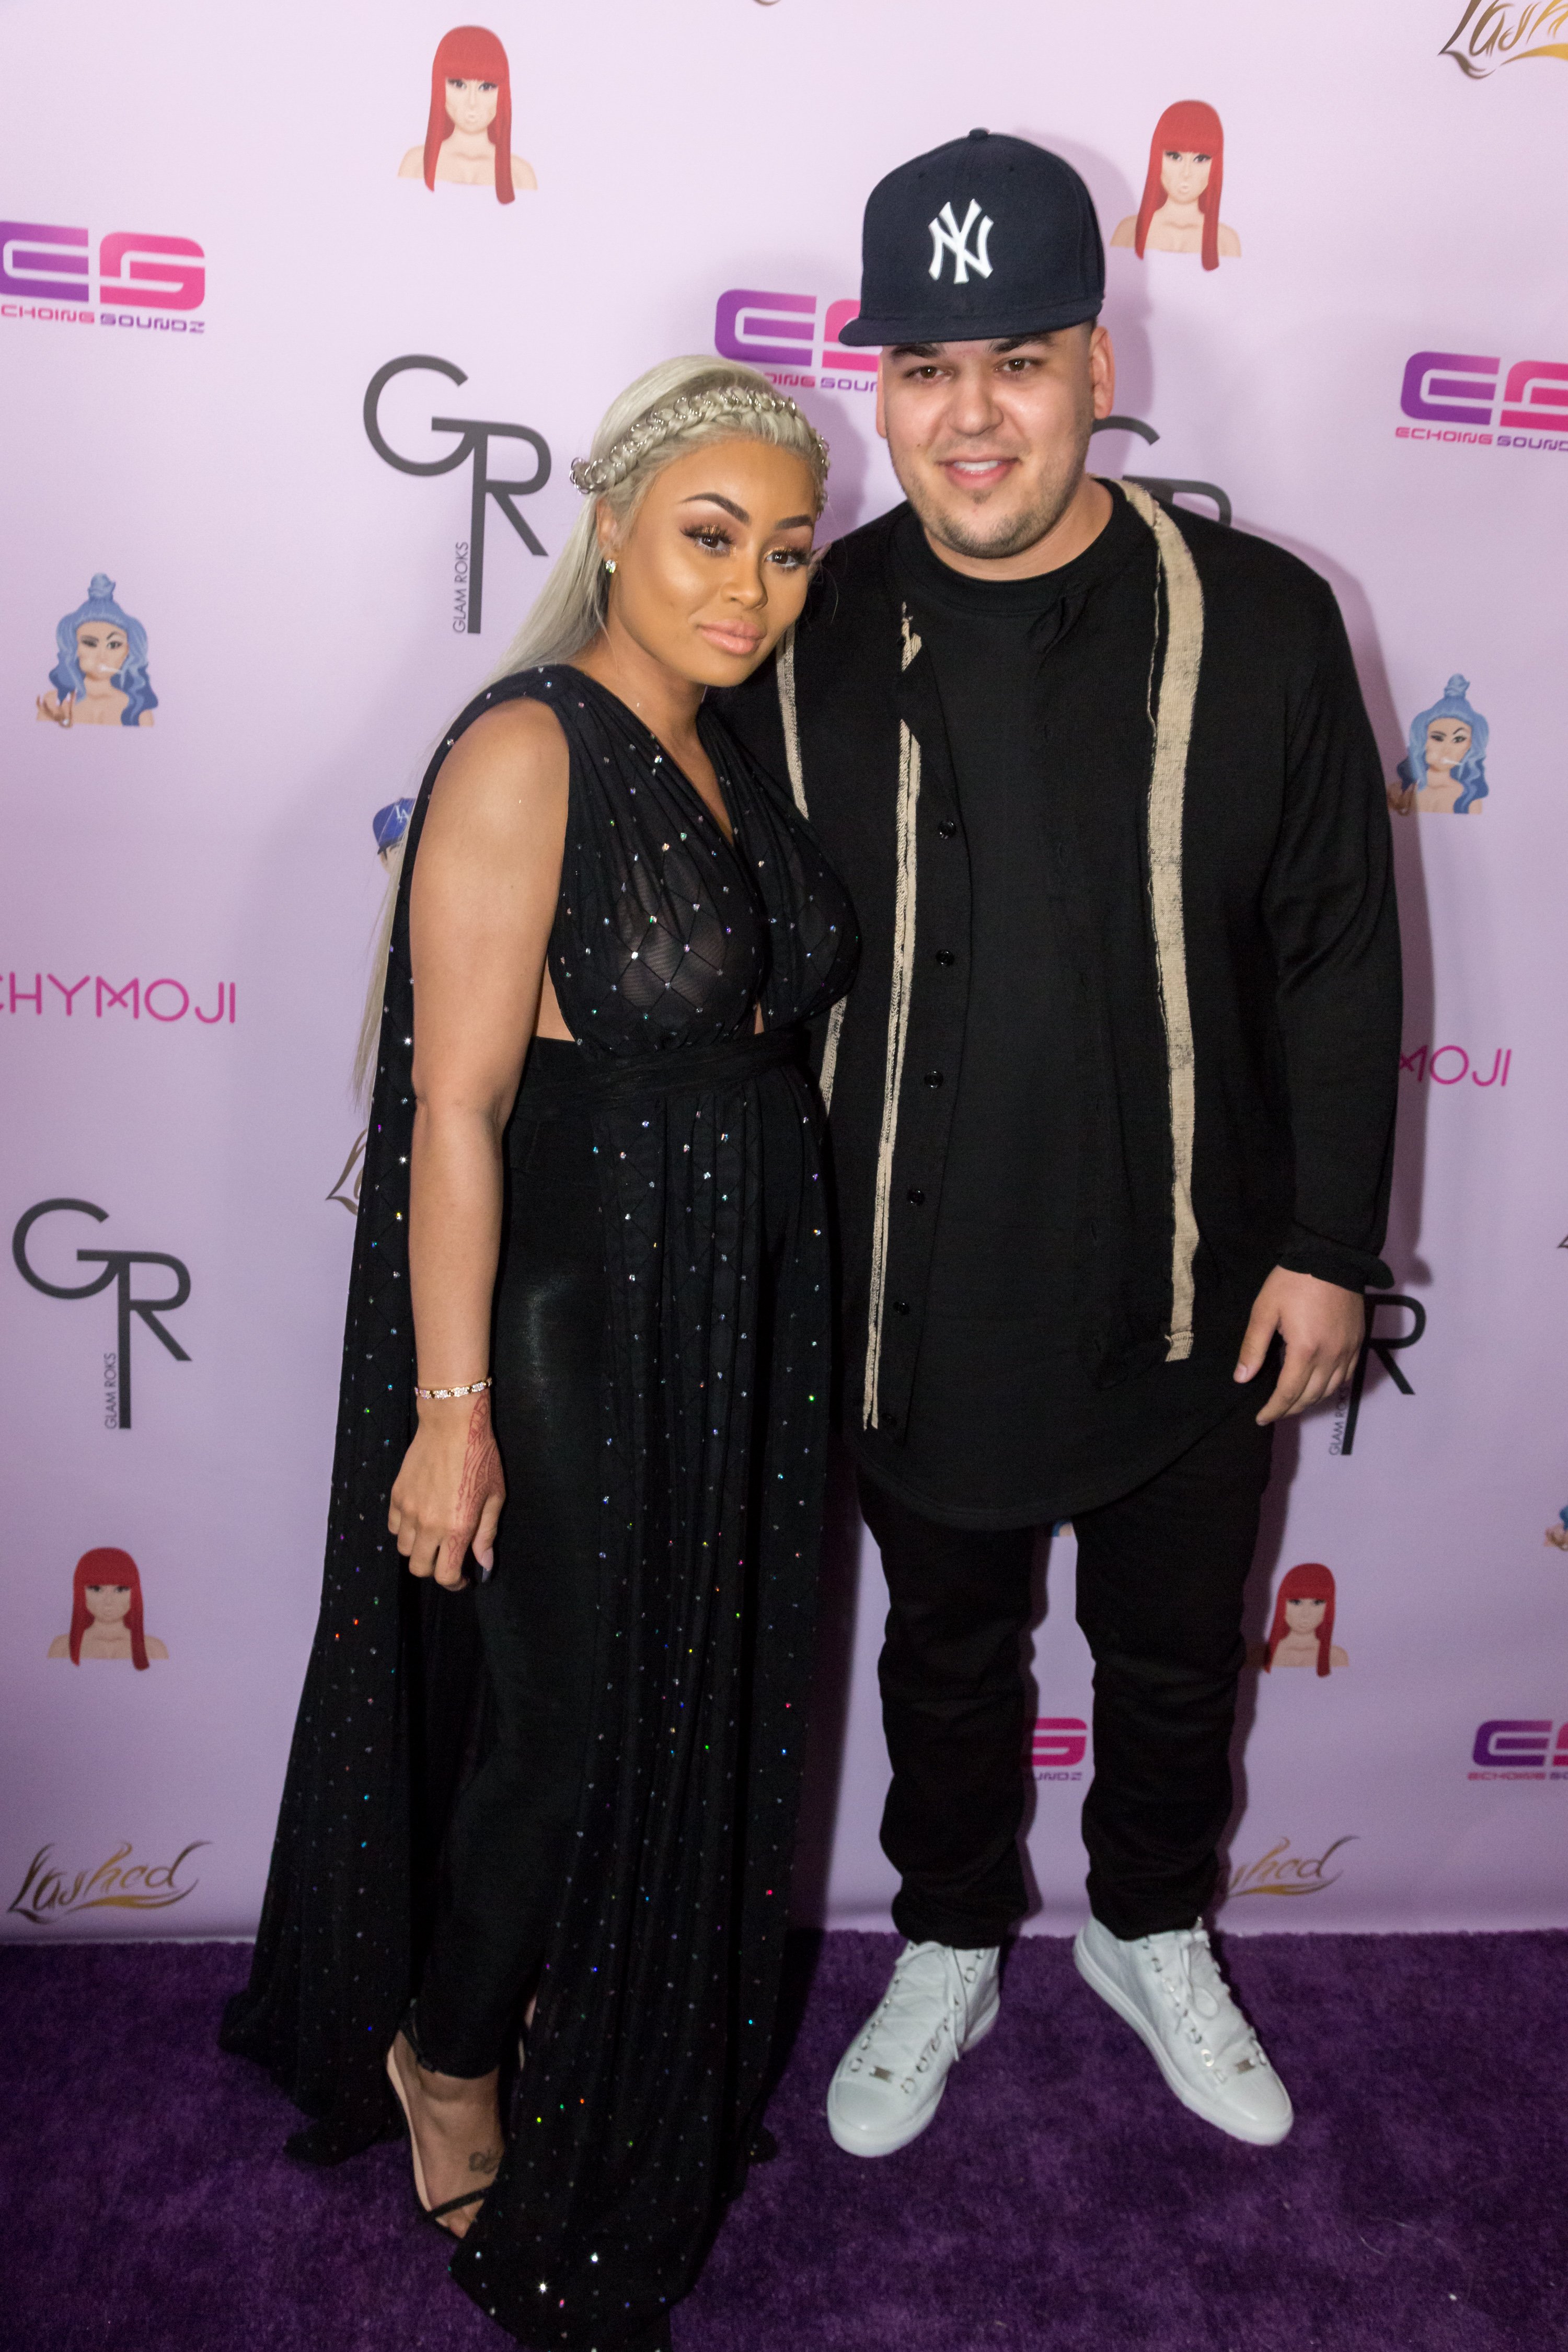 Rob Kardashian with Blac Chyna during her birthday celebration in Hollywood in May 2016. | Photo: Getty Images